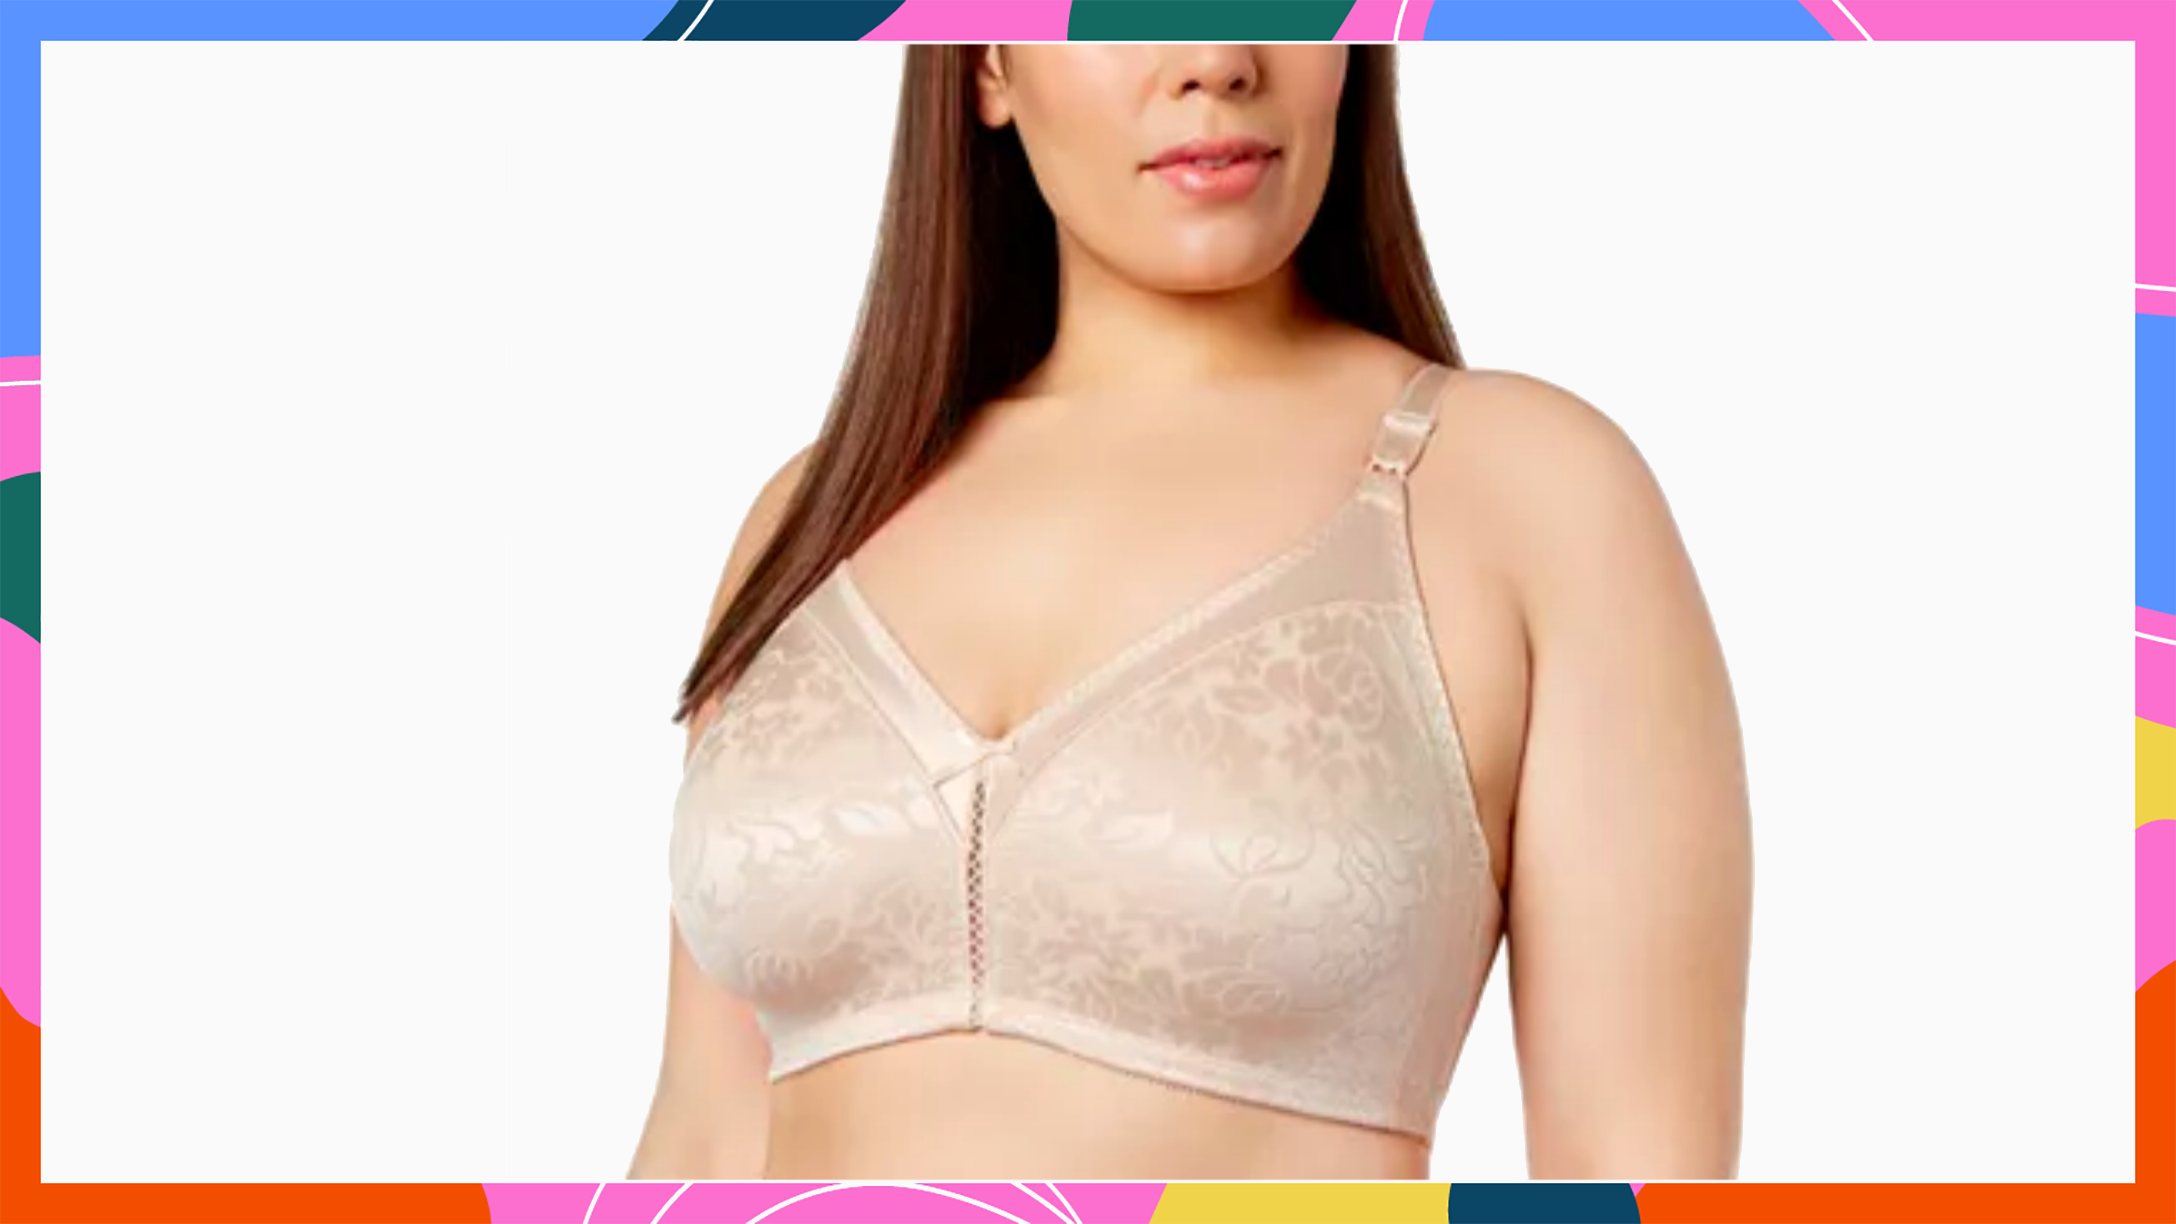 Over 10,000 People Bought This Wire-Free Bra